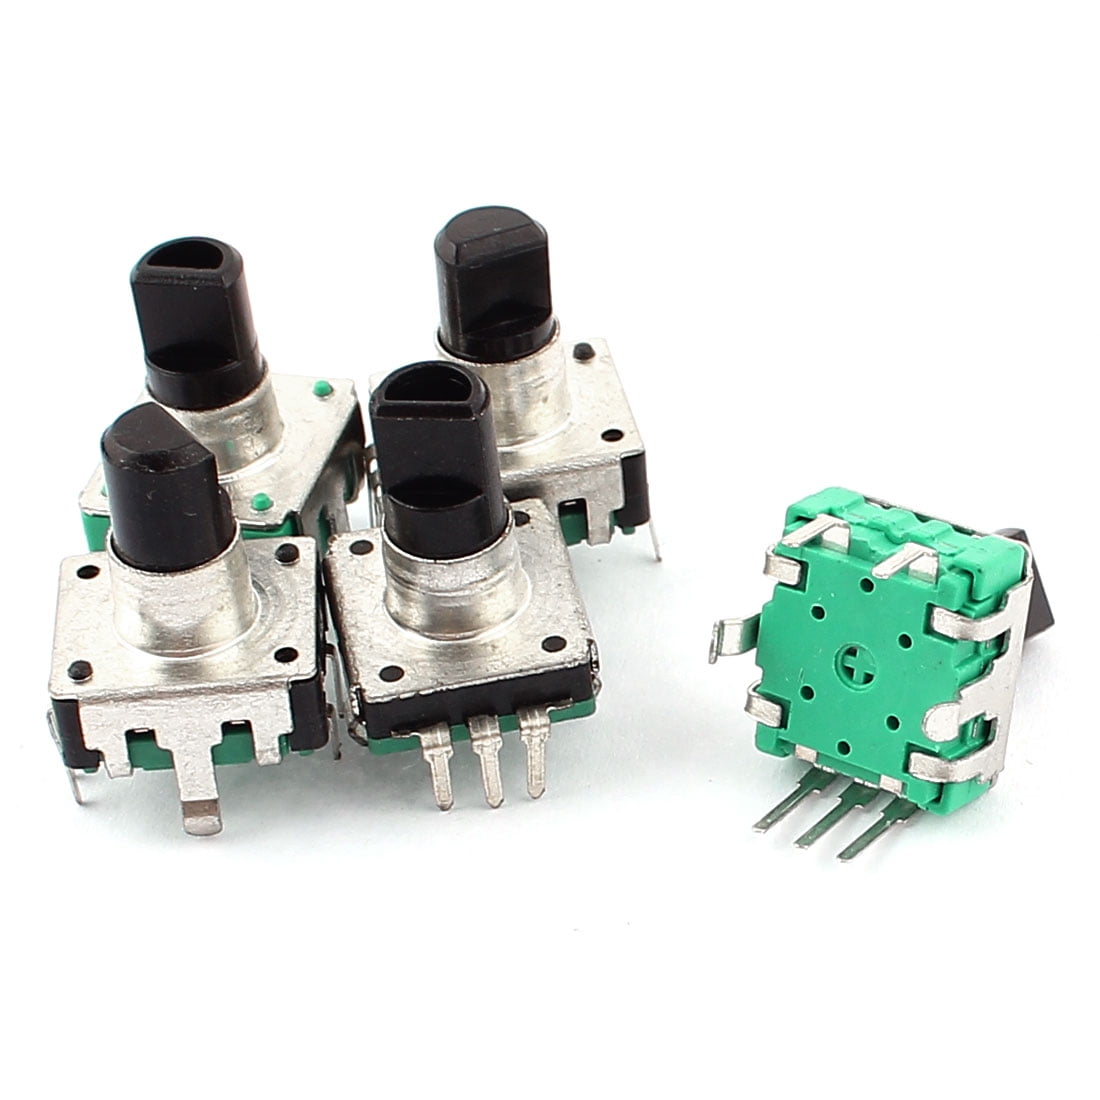 5Pcs Rotary Encoder Push Button Switch Keyswitch Electronic Components 12mm Y bc 